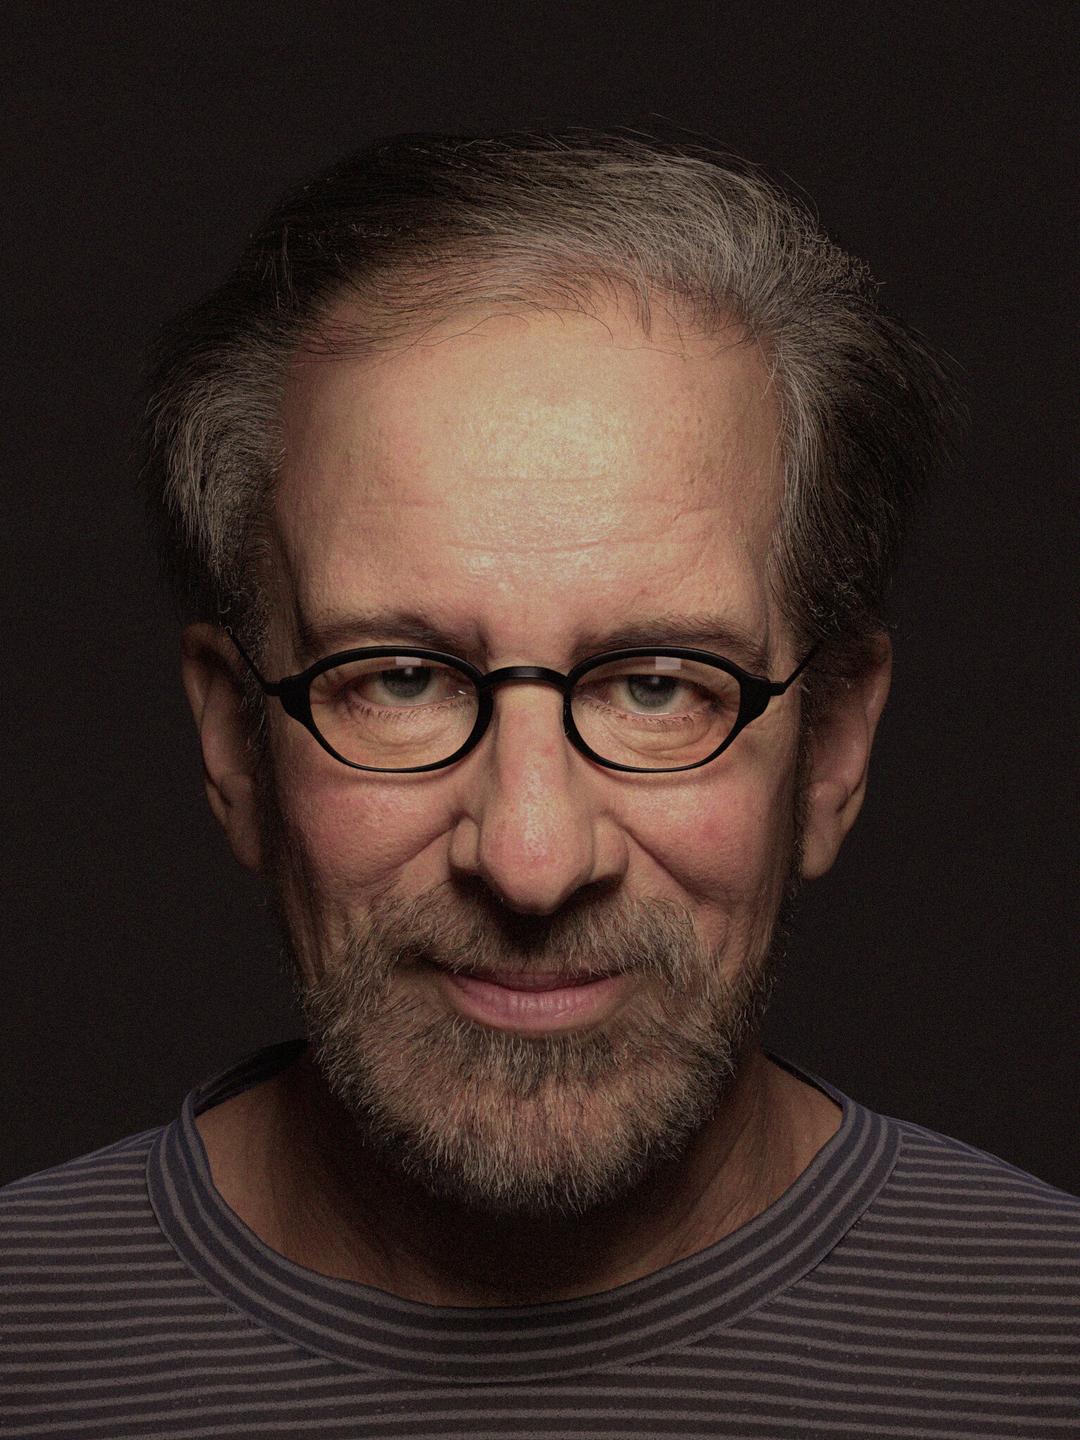 Steven Spielberg who is his father